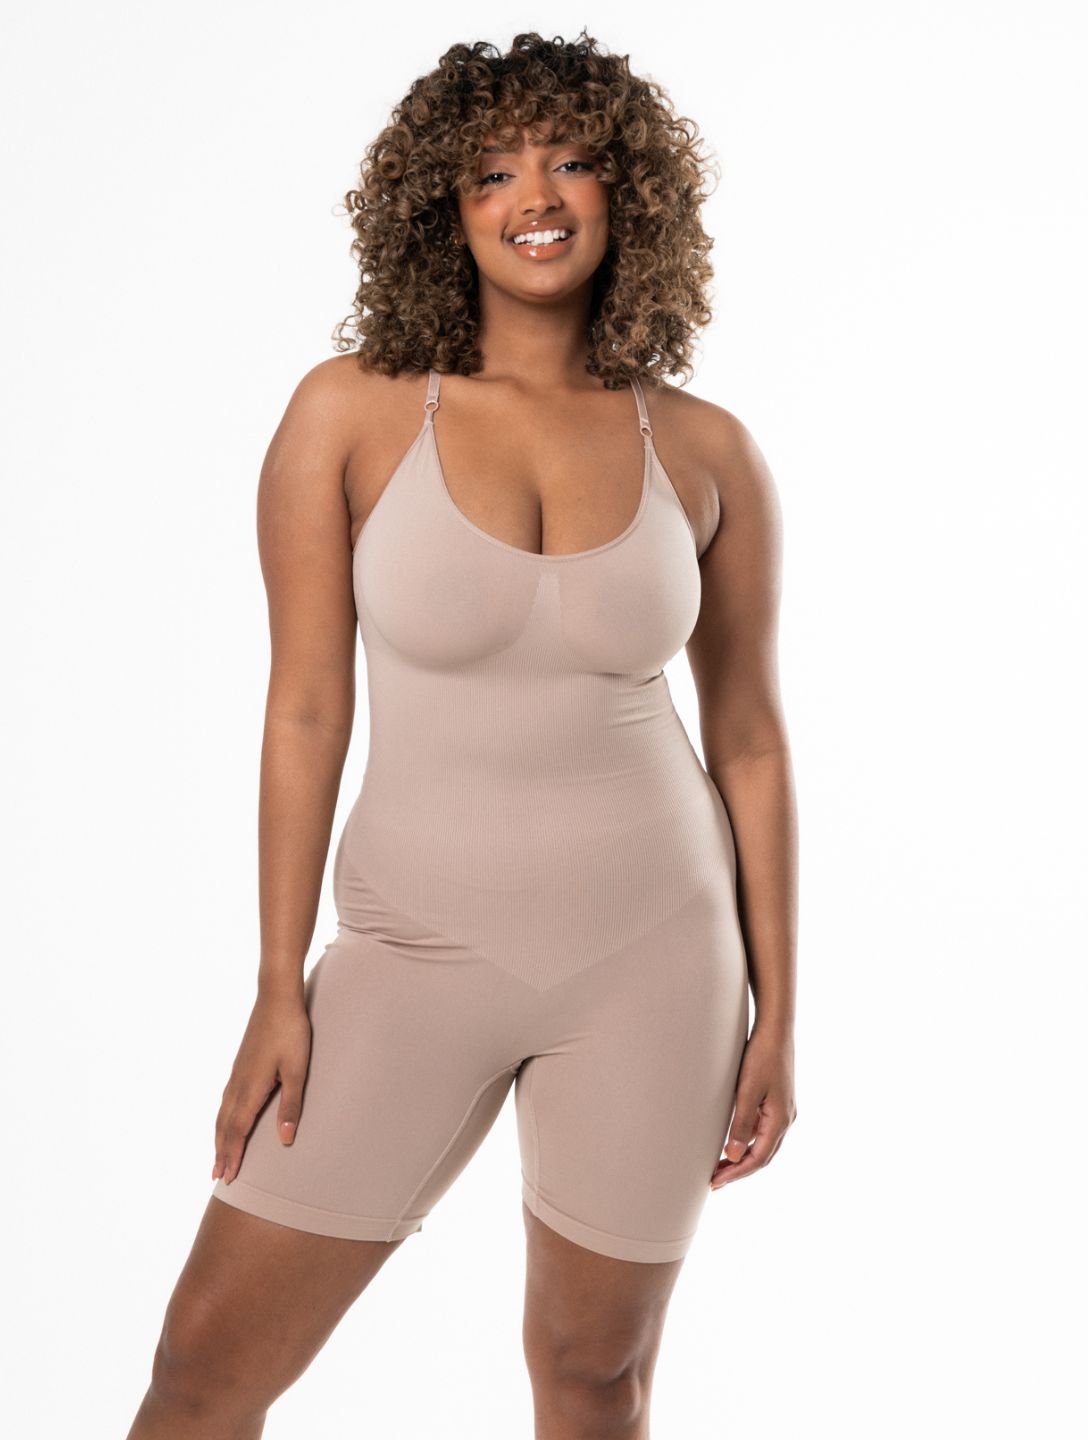 Shapely Bodysuit Reviews: Is It Worth the Hype?, by helloshapely